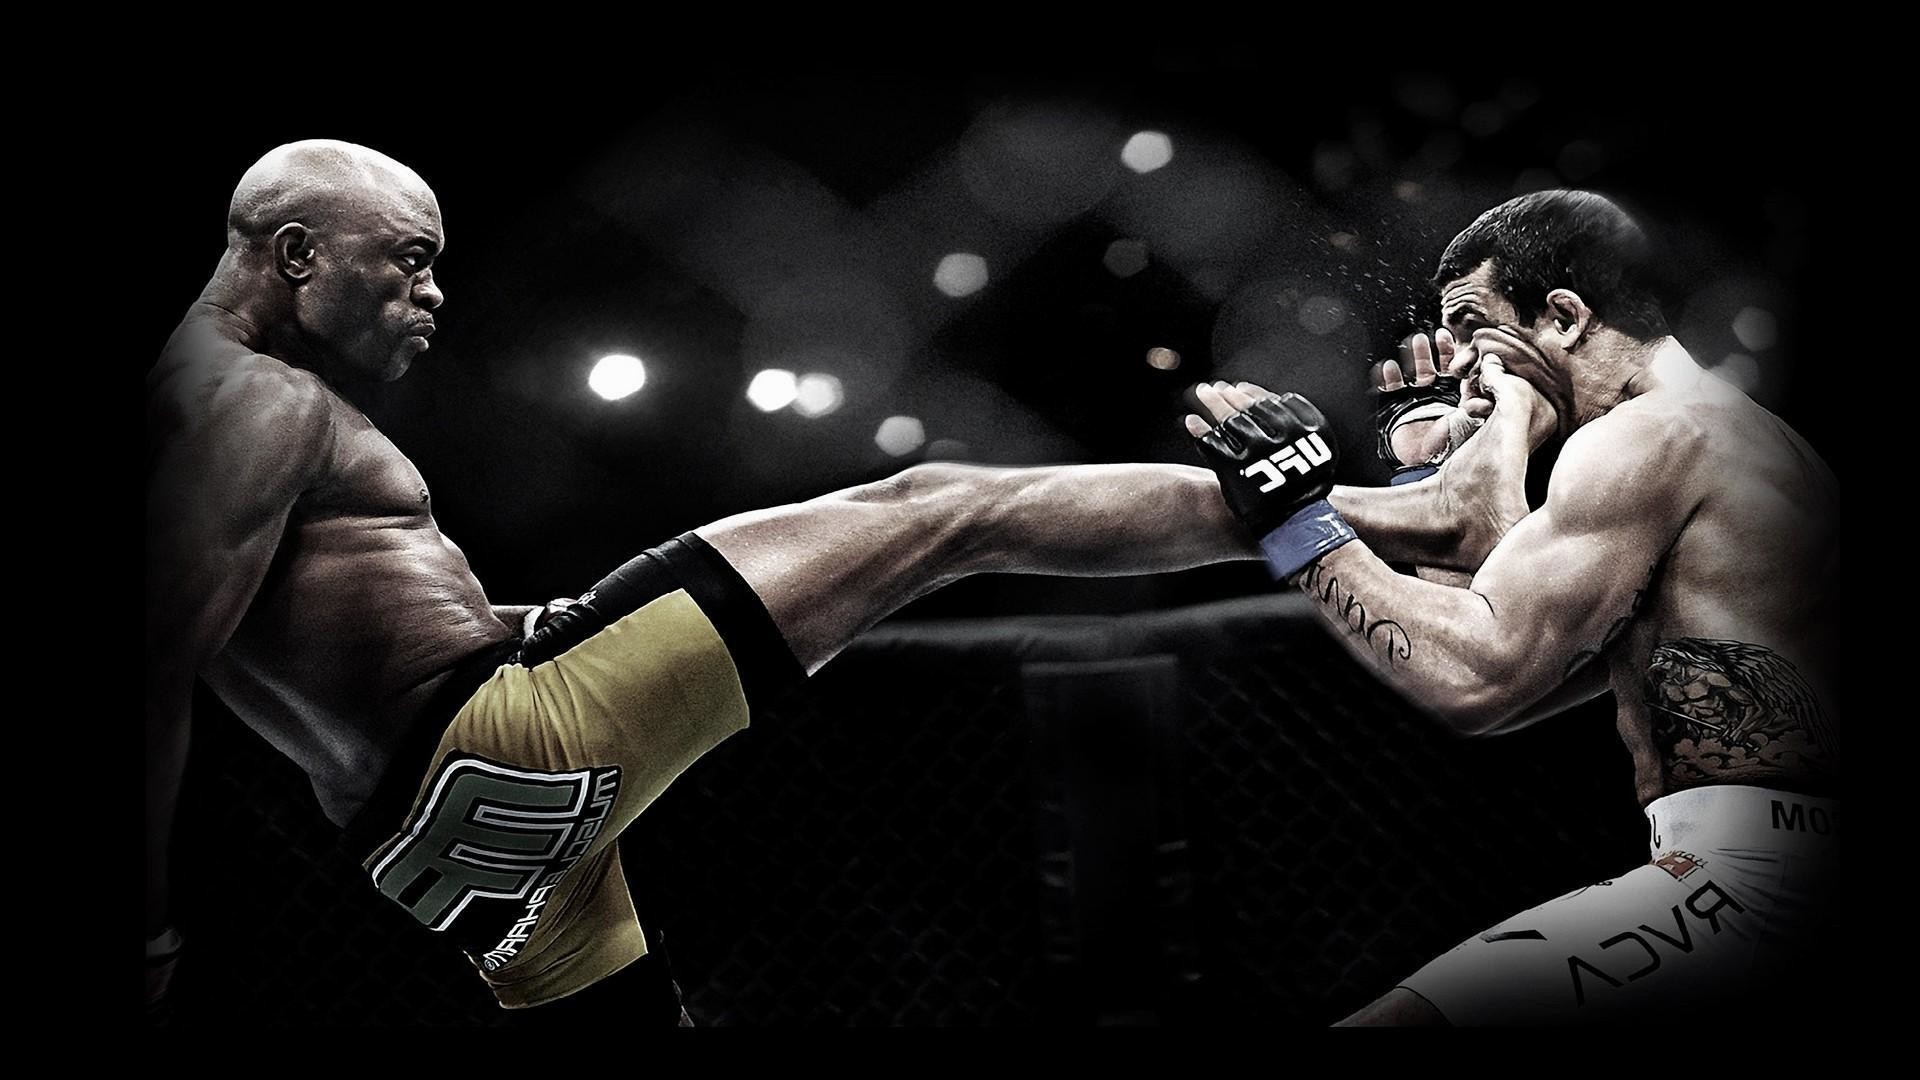 1920x1080  Tags:  UFC. Download. Boxing Wallpaper